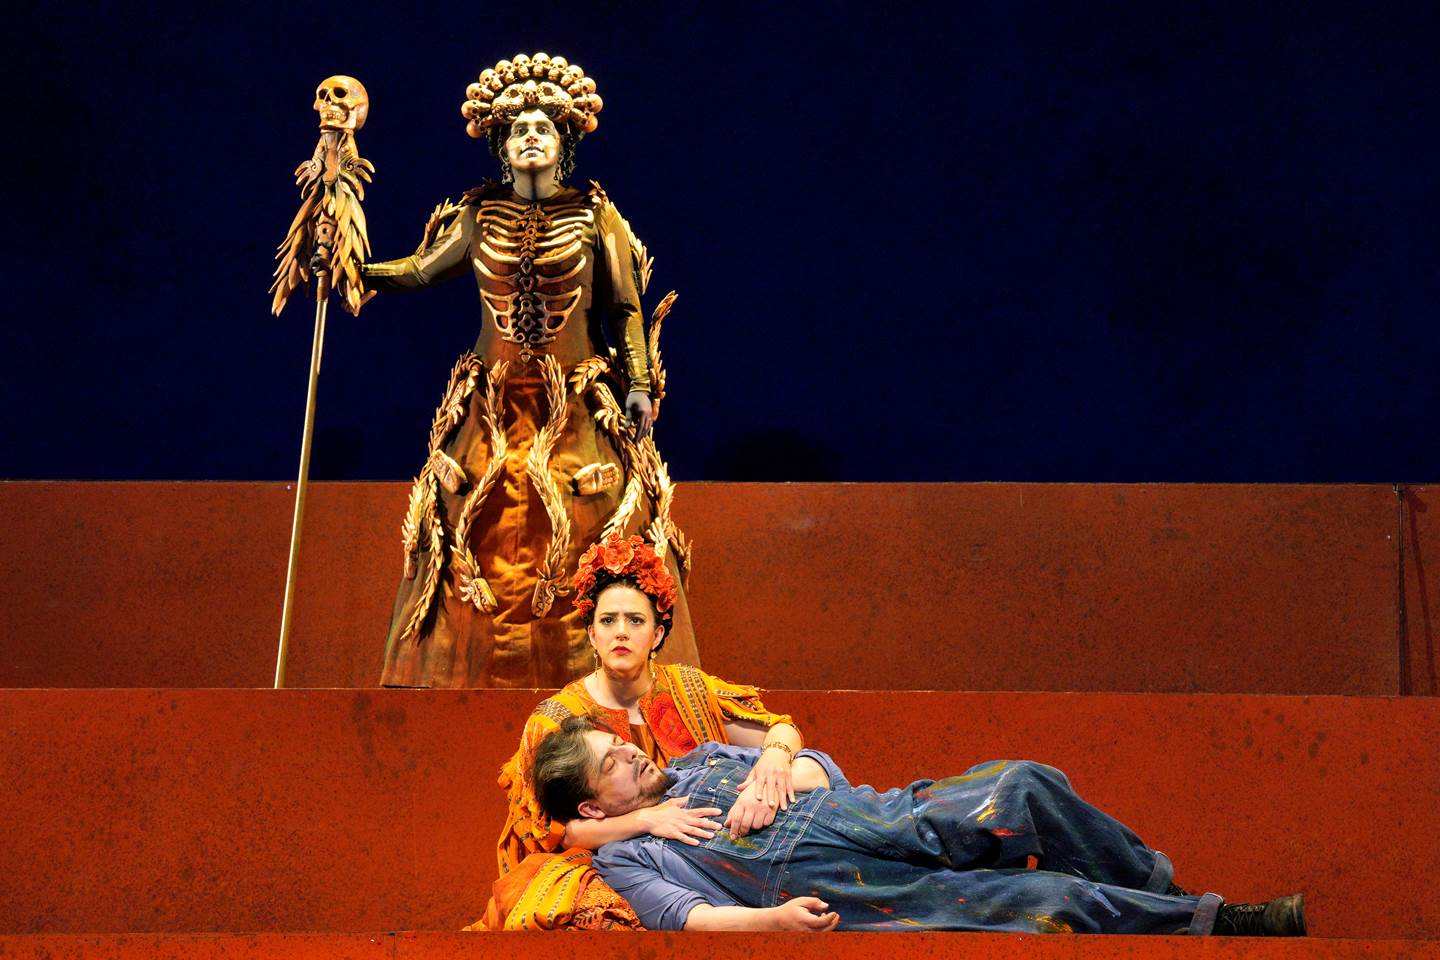 Scene from Frida of a woman holding a man laying on the floor while a person in a skeleton costume stands behind them.